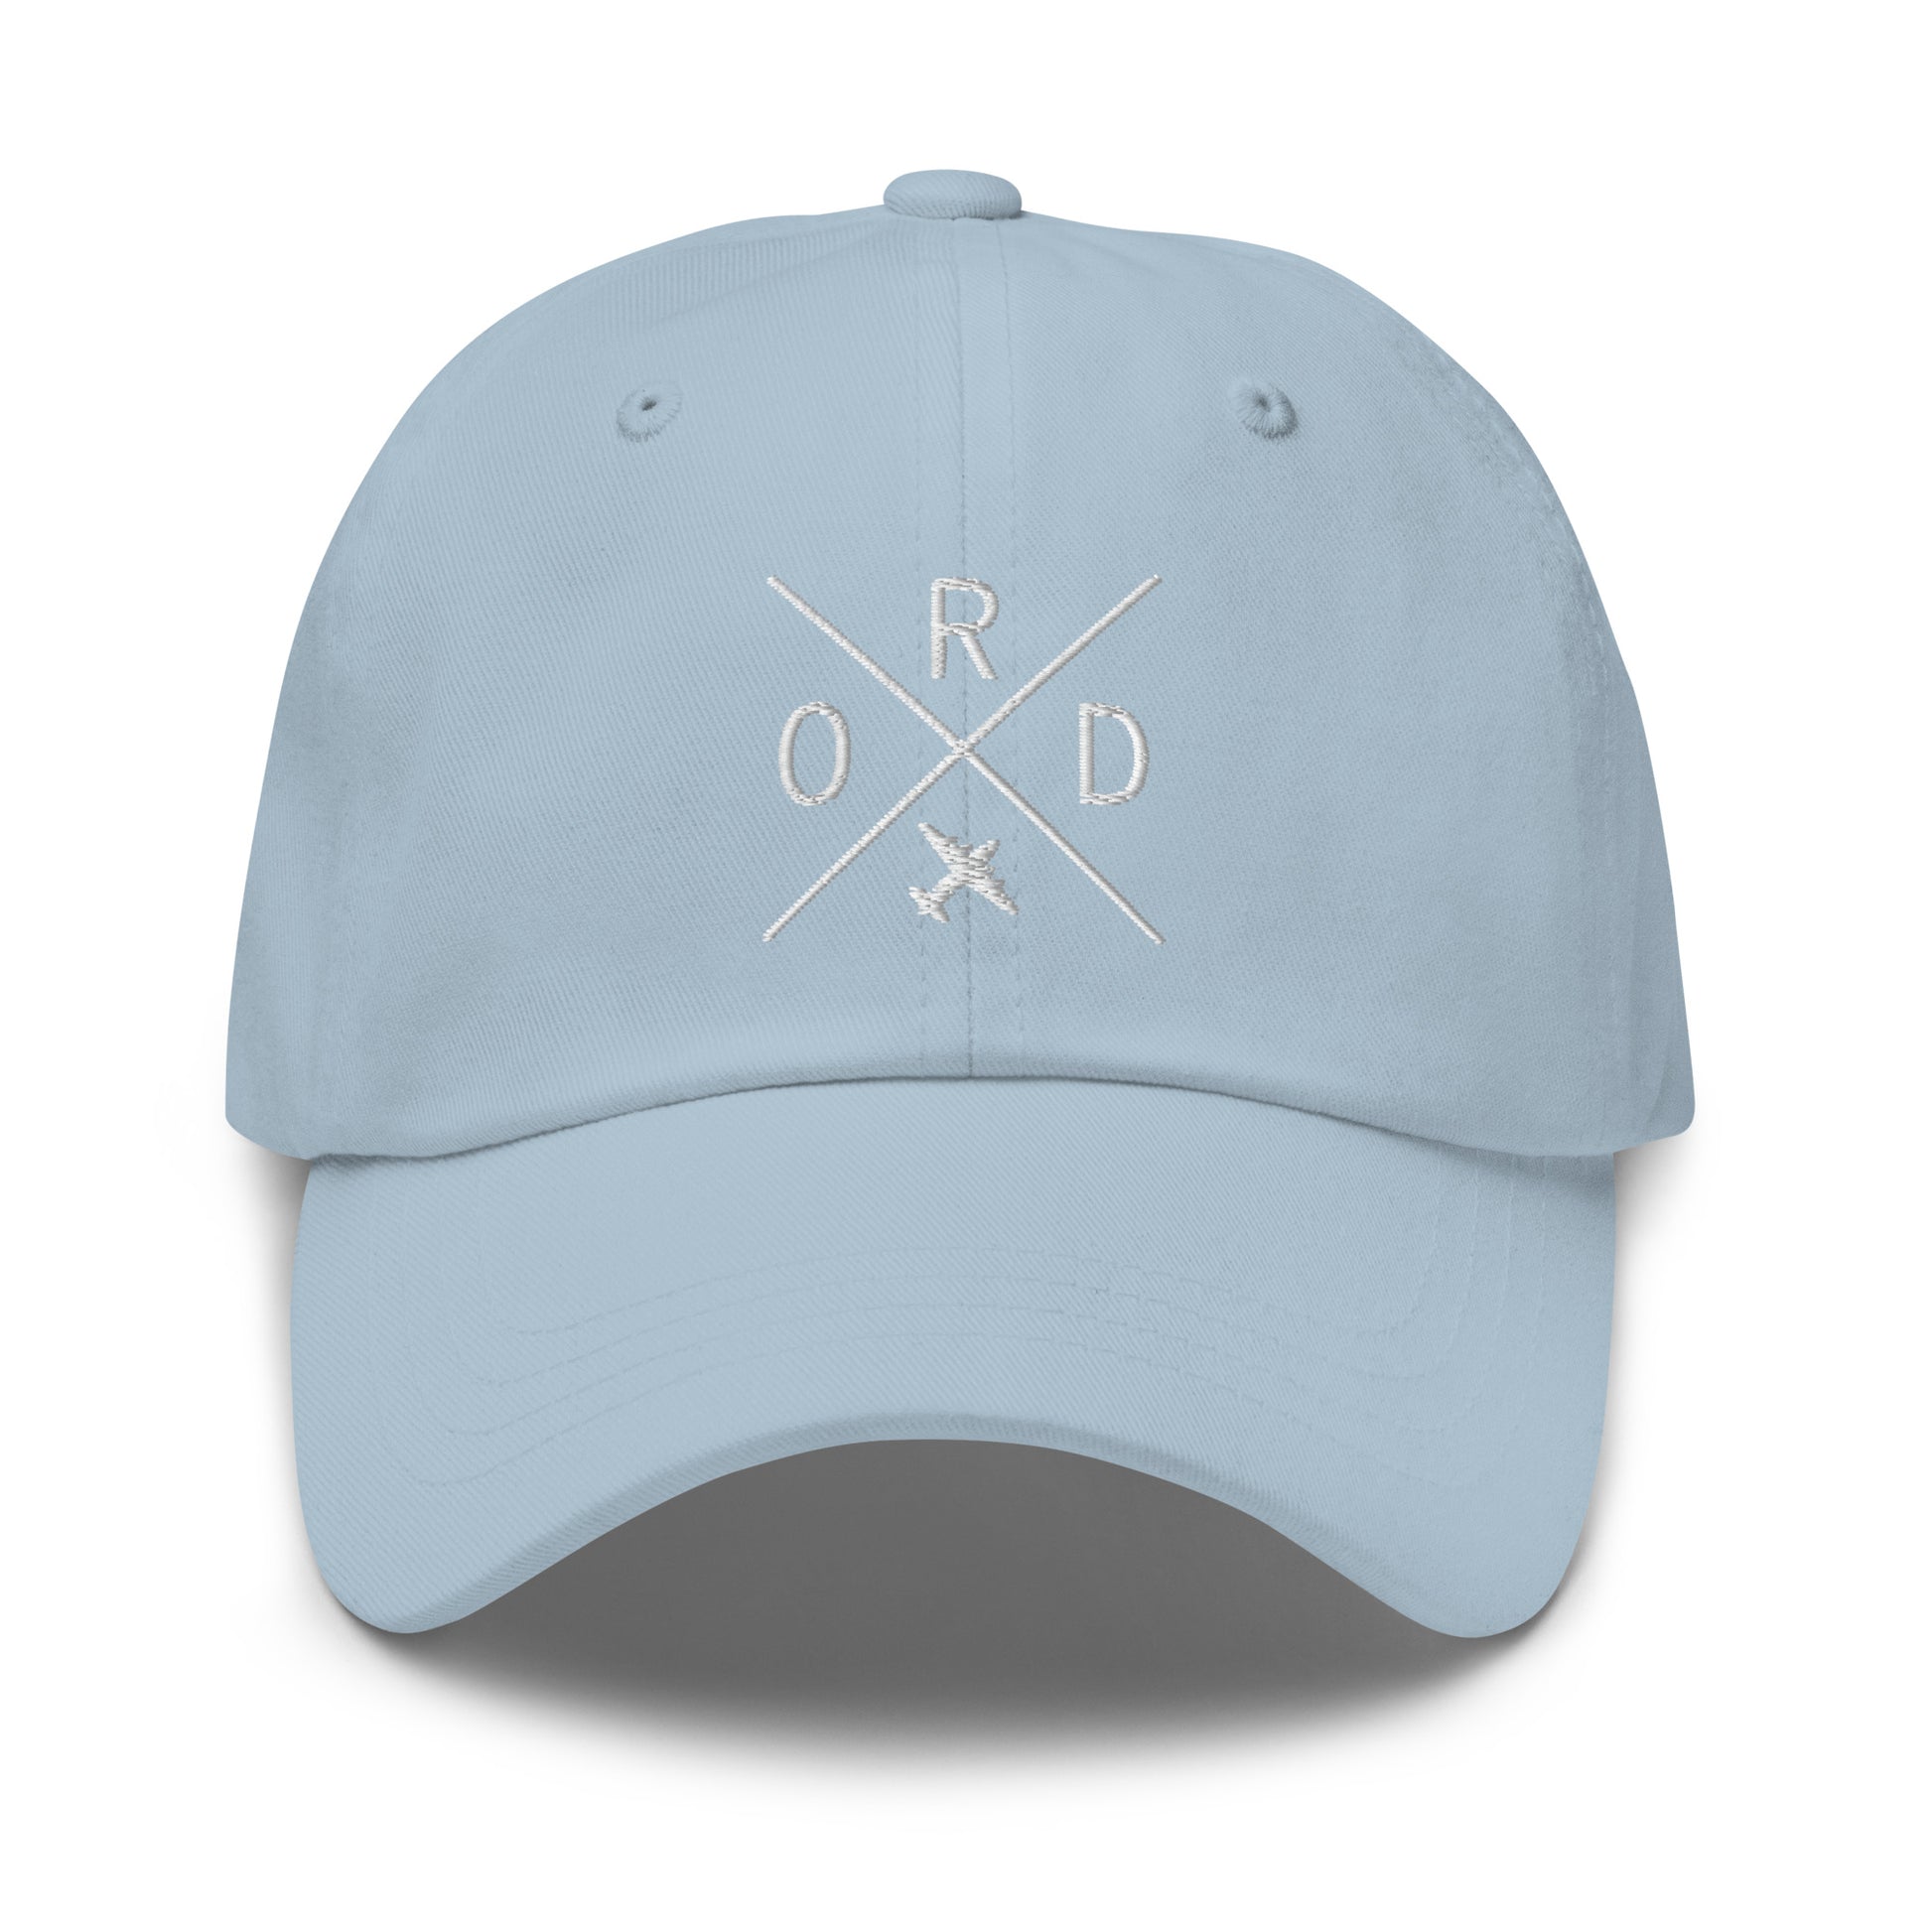 Crossed-X Dad Hat - White • ORD Chicago • YHM Designs - Image 28